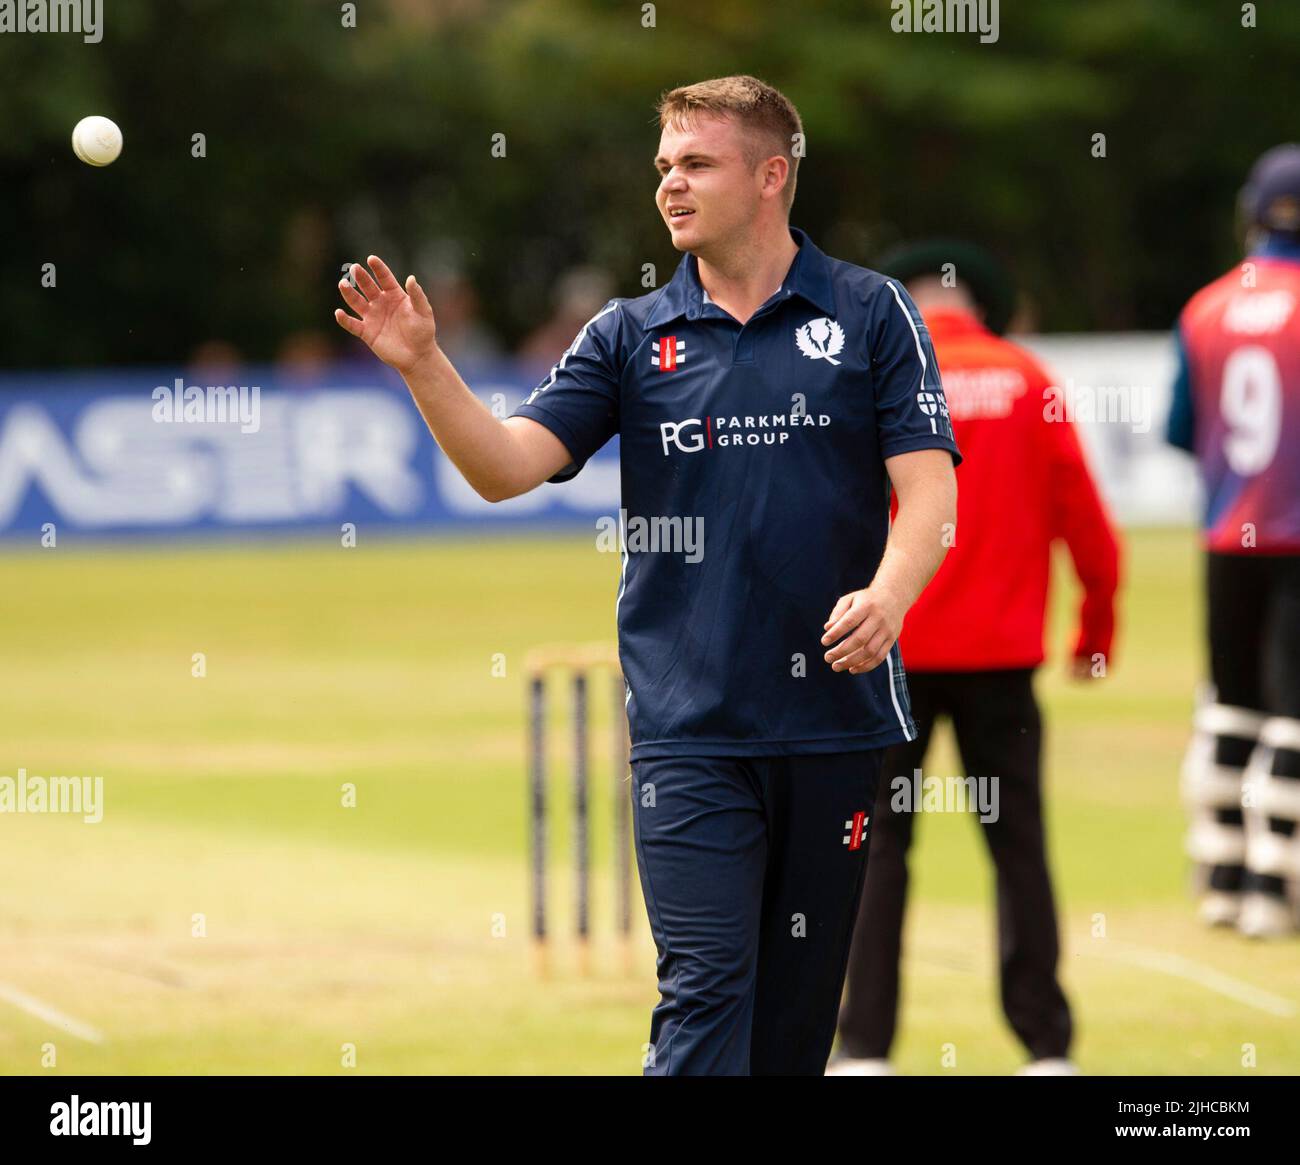 ICC Men's Cricket World Cup League 2 - Scotland v, Nepal. 17th July, 2022. Scotland take on Nepal for the second time in the ICC Div 2 Men's Cricket World Cup League 2 at Titwood, Glasgow. Pic shows: Scotland's Chris McBride. Credit: Ian Jacobs/Alamy Live News Stock Photo